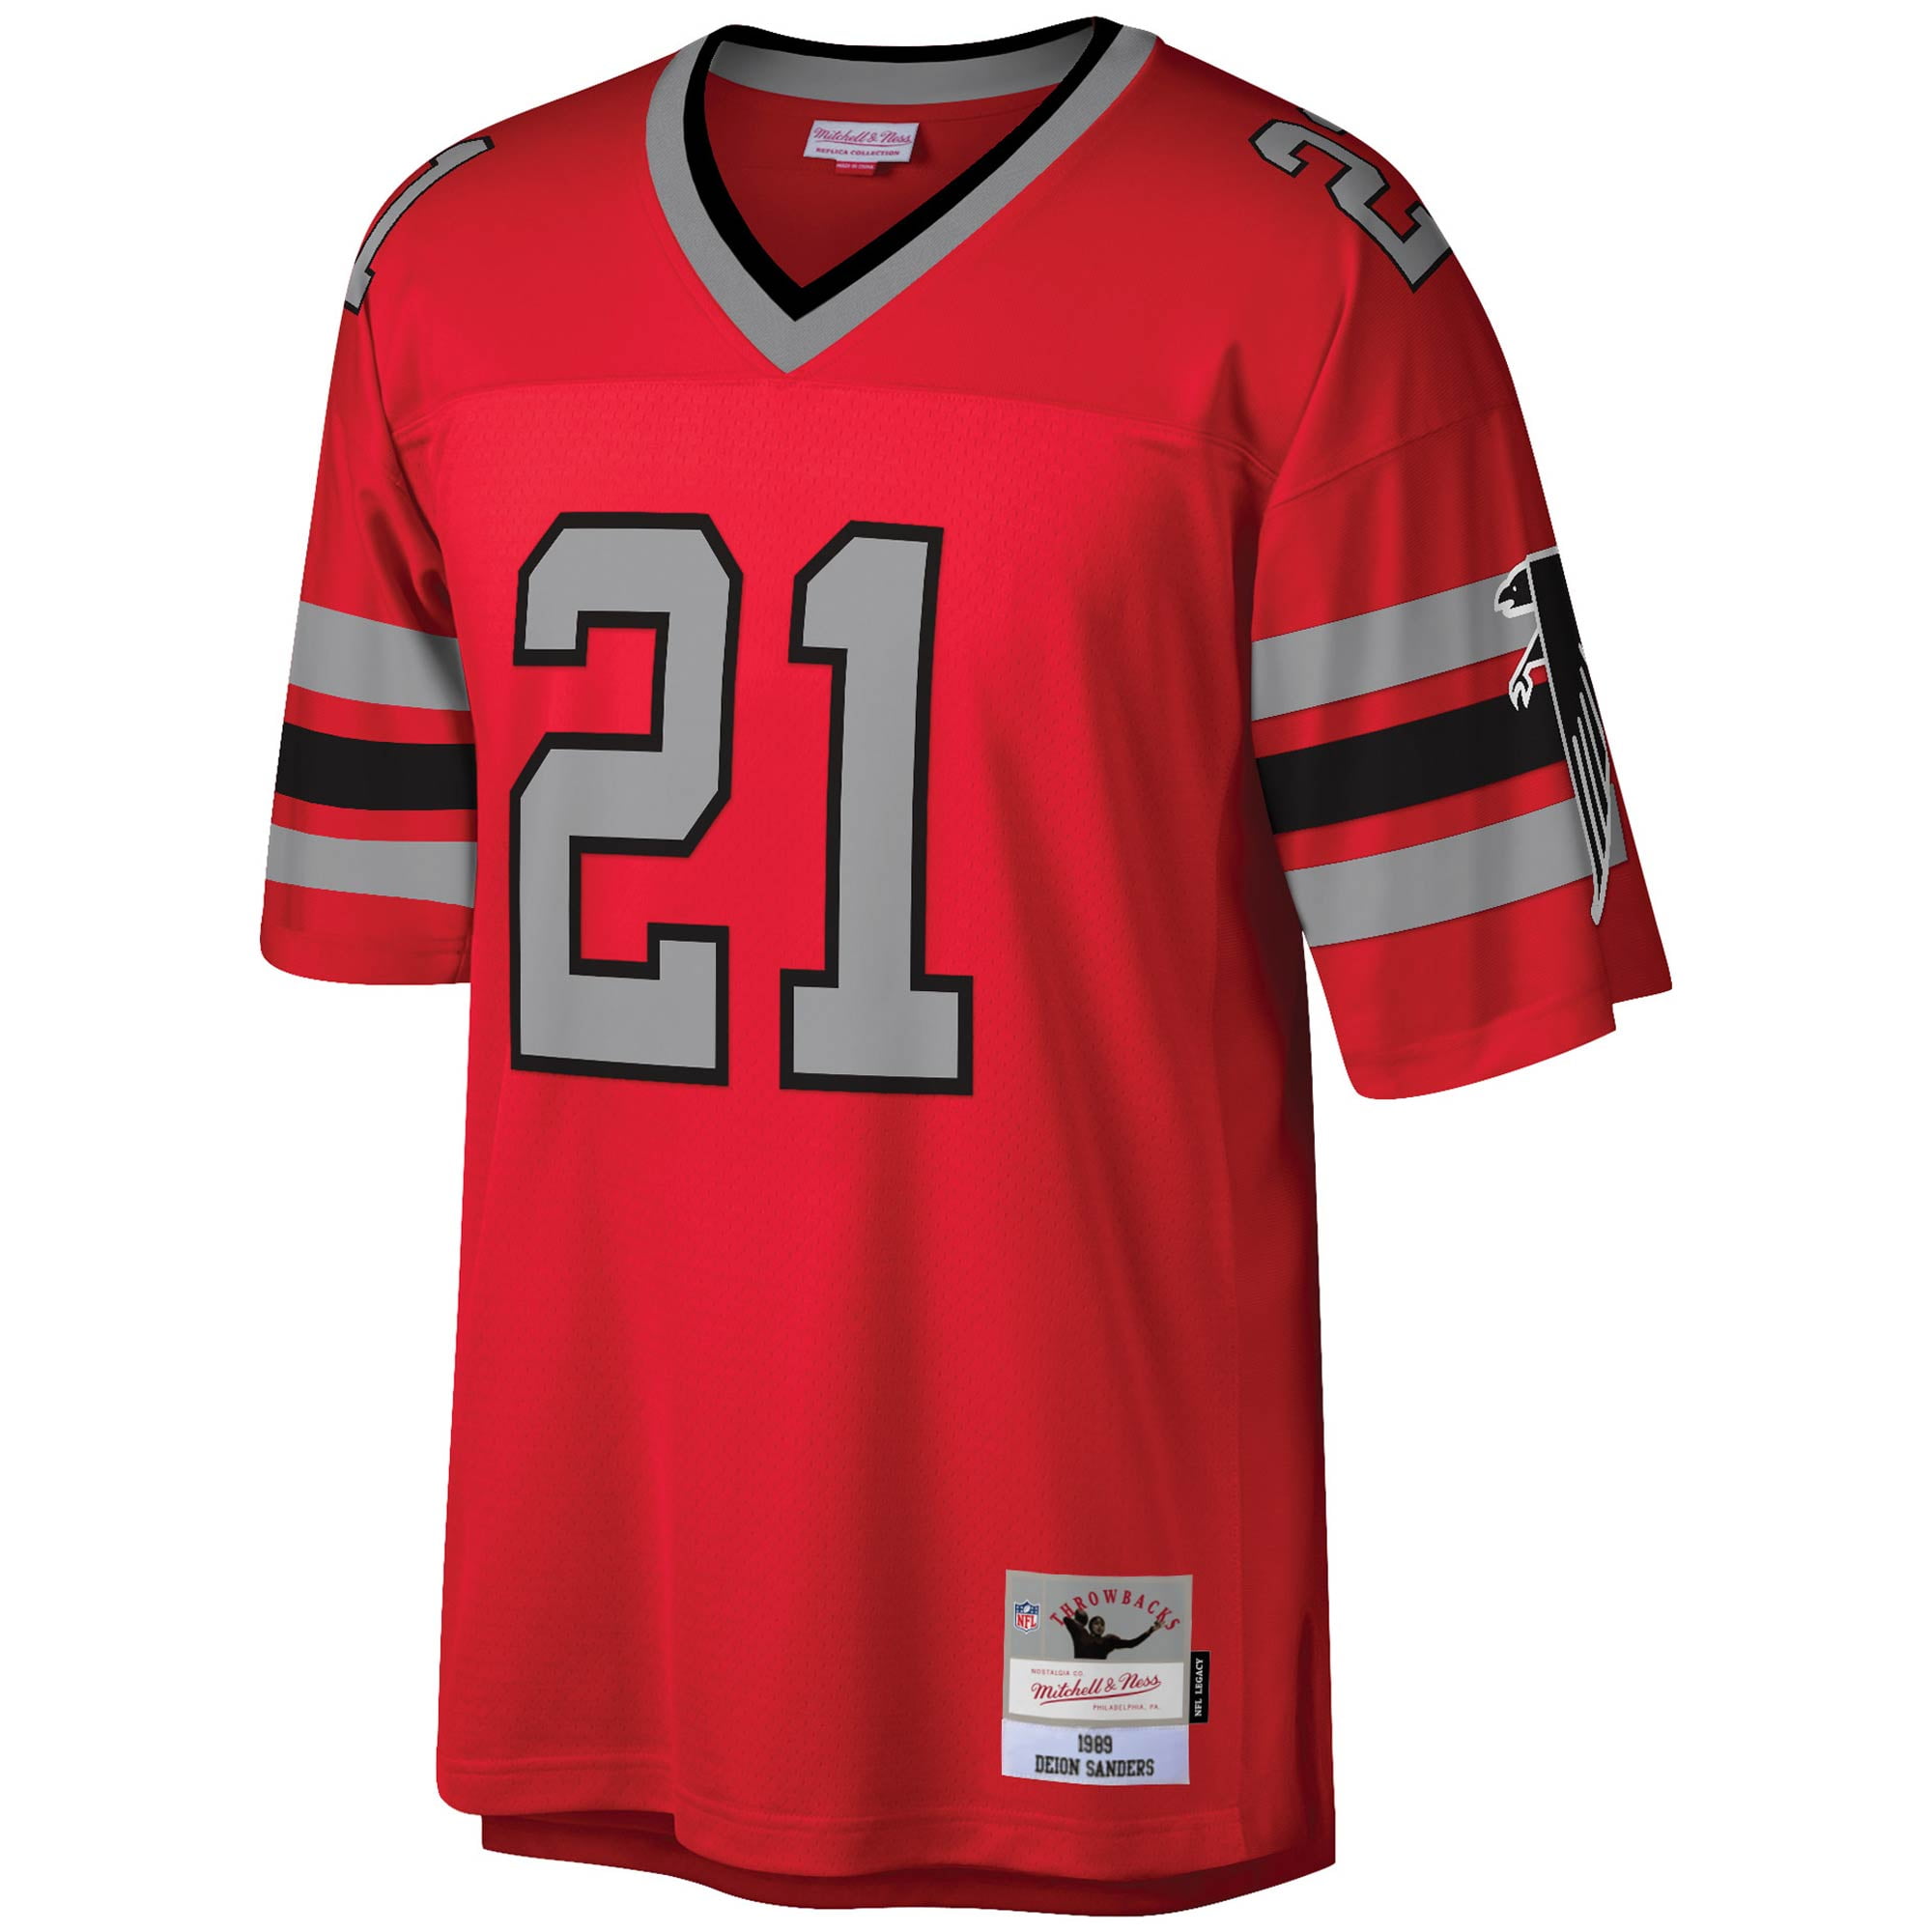 deion sanders mitchell and ness jersey